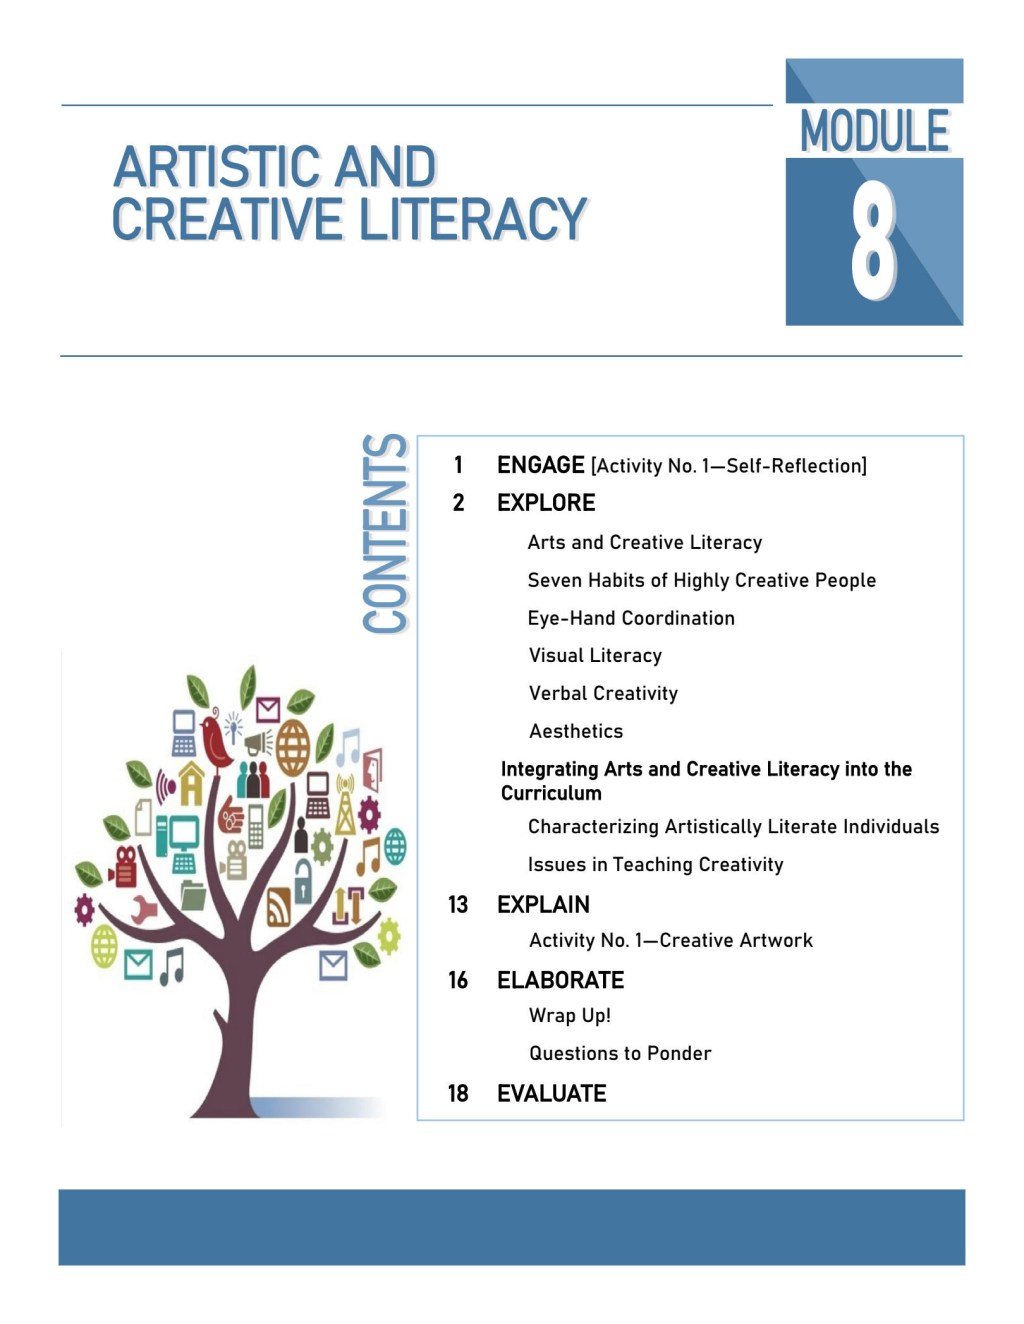 solution m artistic and creative literacy pdf studypool